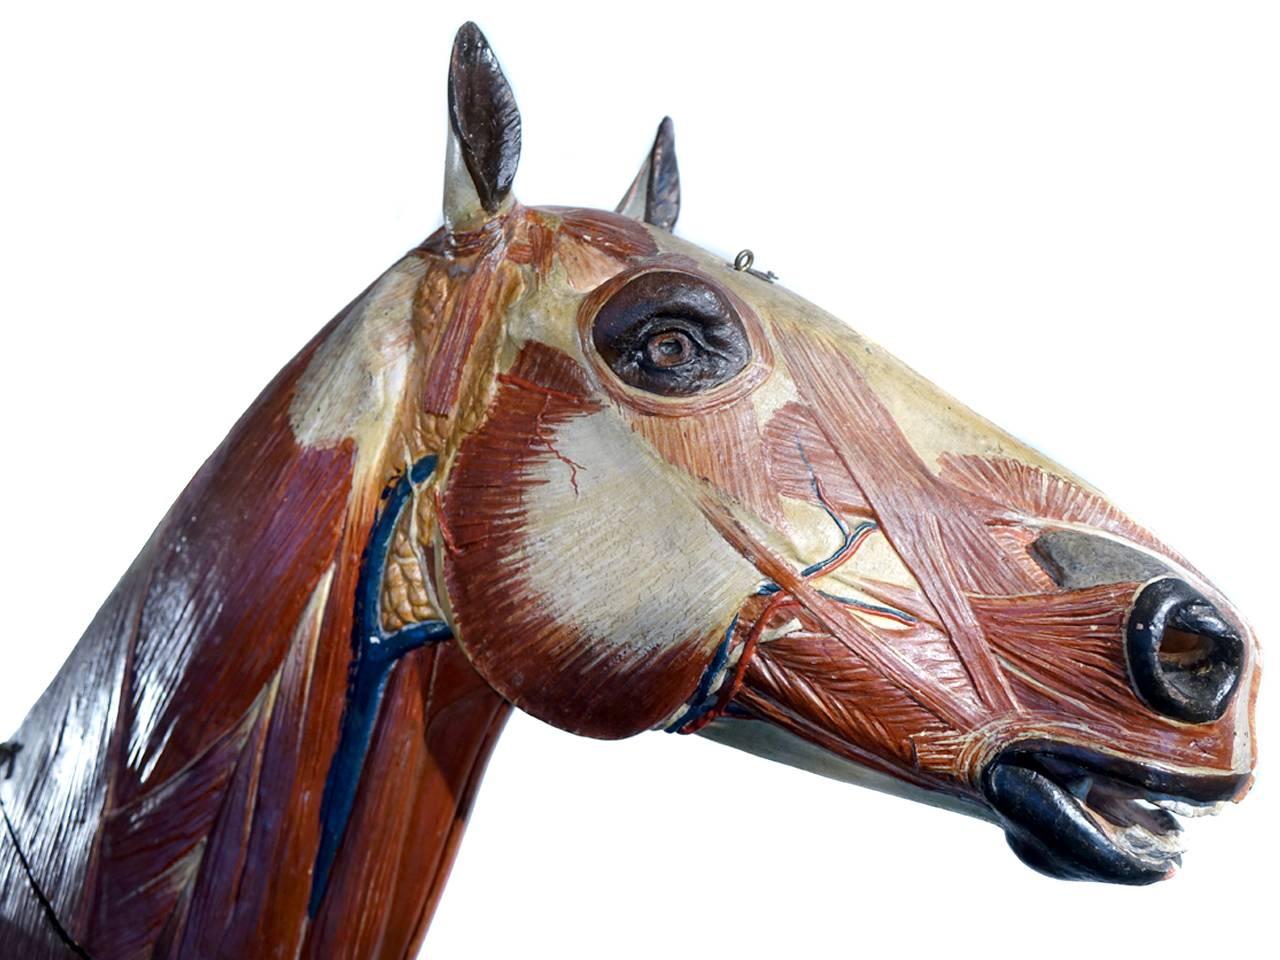 This is an important handmade large scale papier mâché anatomical model of a horse. It's close to two thirds scale and over four foot long. At the turn of the century France and Berlin were known for their elaborate teaching models. We just returned